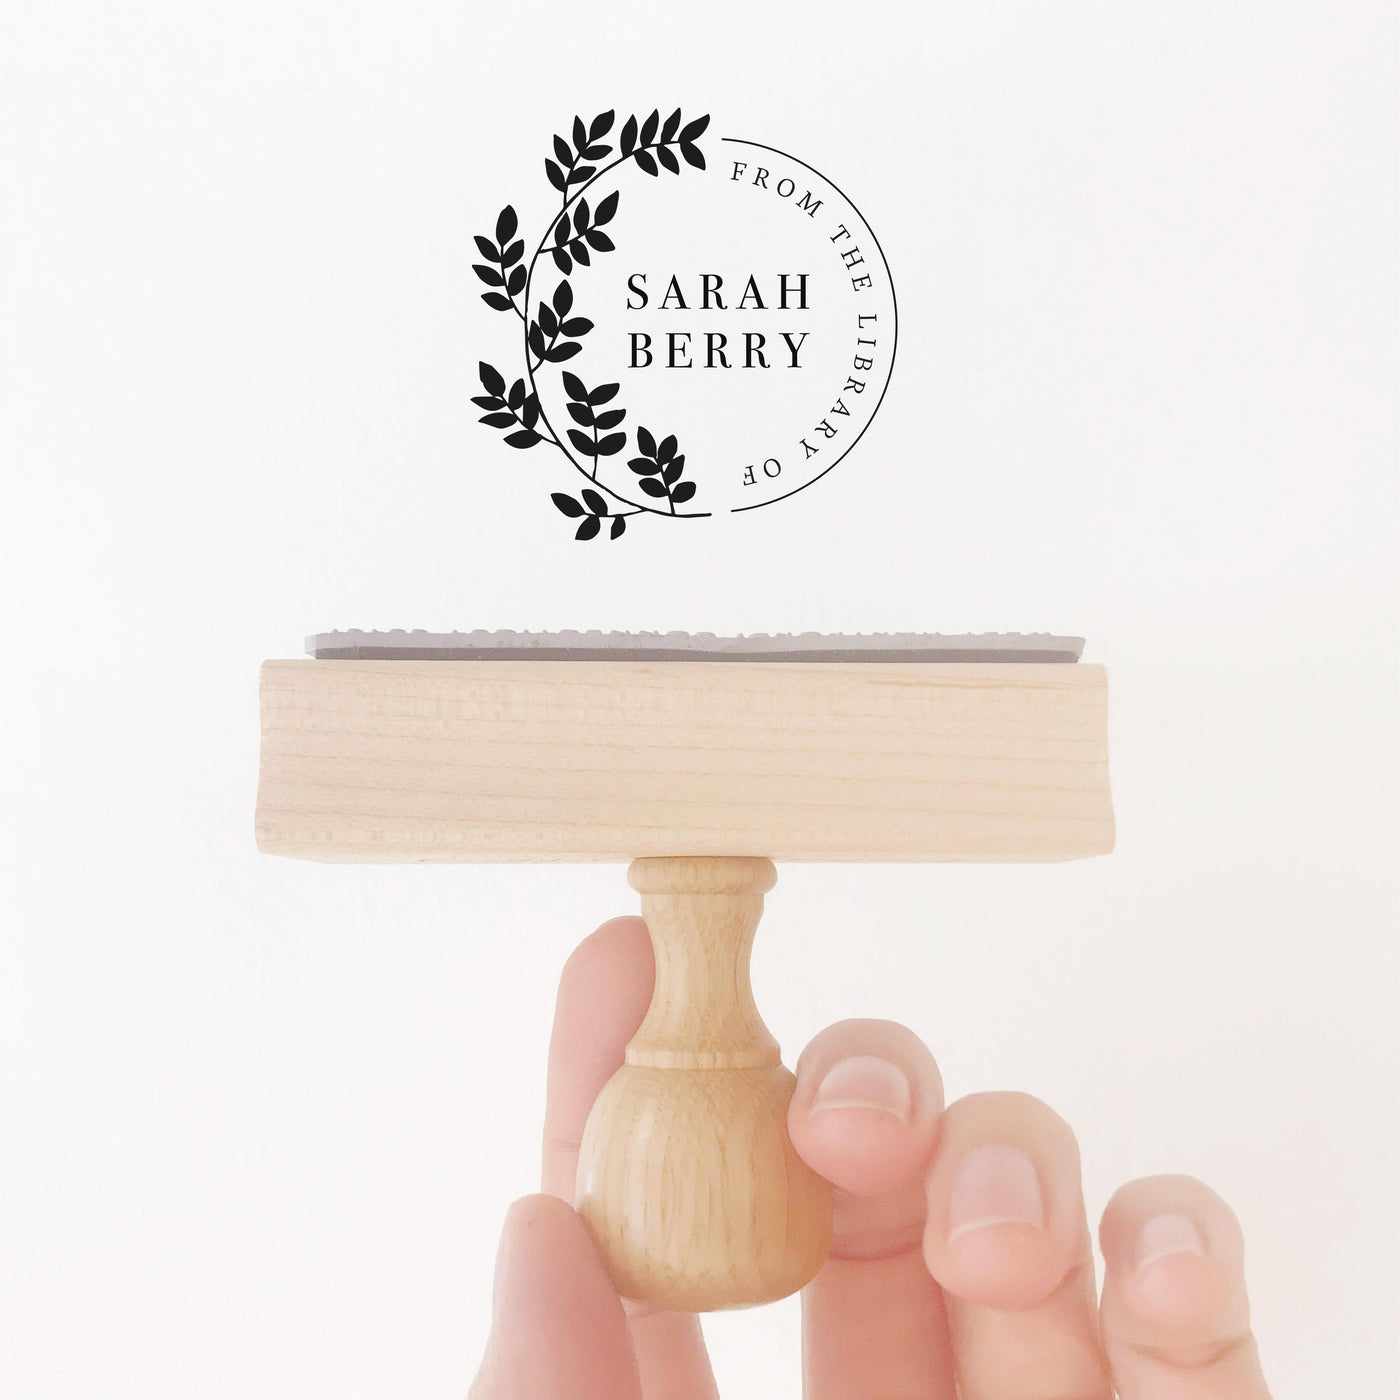 Beatrice Classic Rustic Botanical Library Book Stamp | Custom Ex Libre Rubber Stamp with Wooden Handle for Wedding Couple & Family House Warming Gift, Luxe Packaging Embellishment | Heirloom Seals